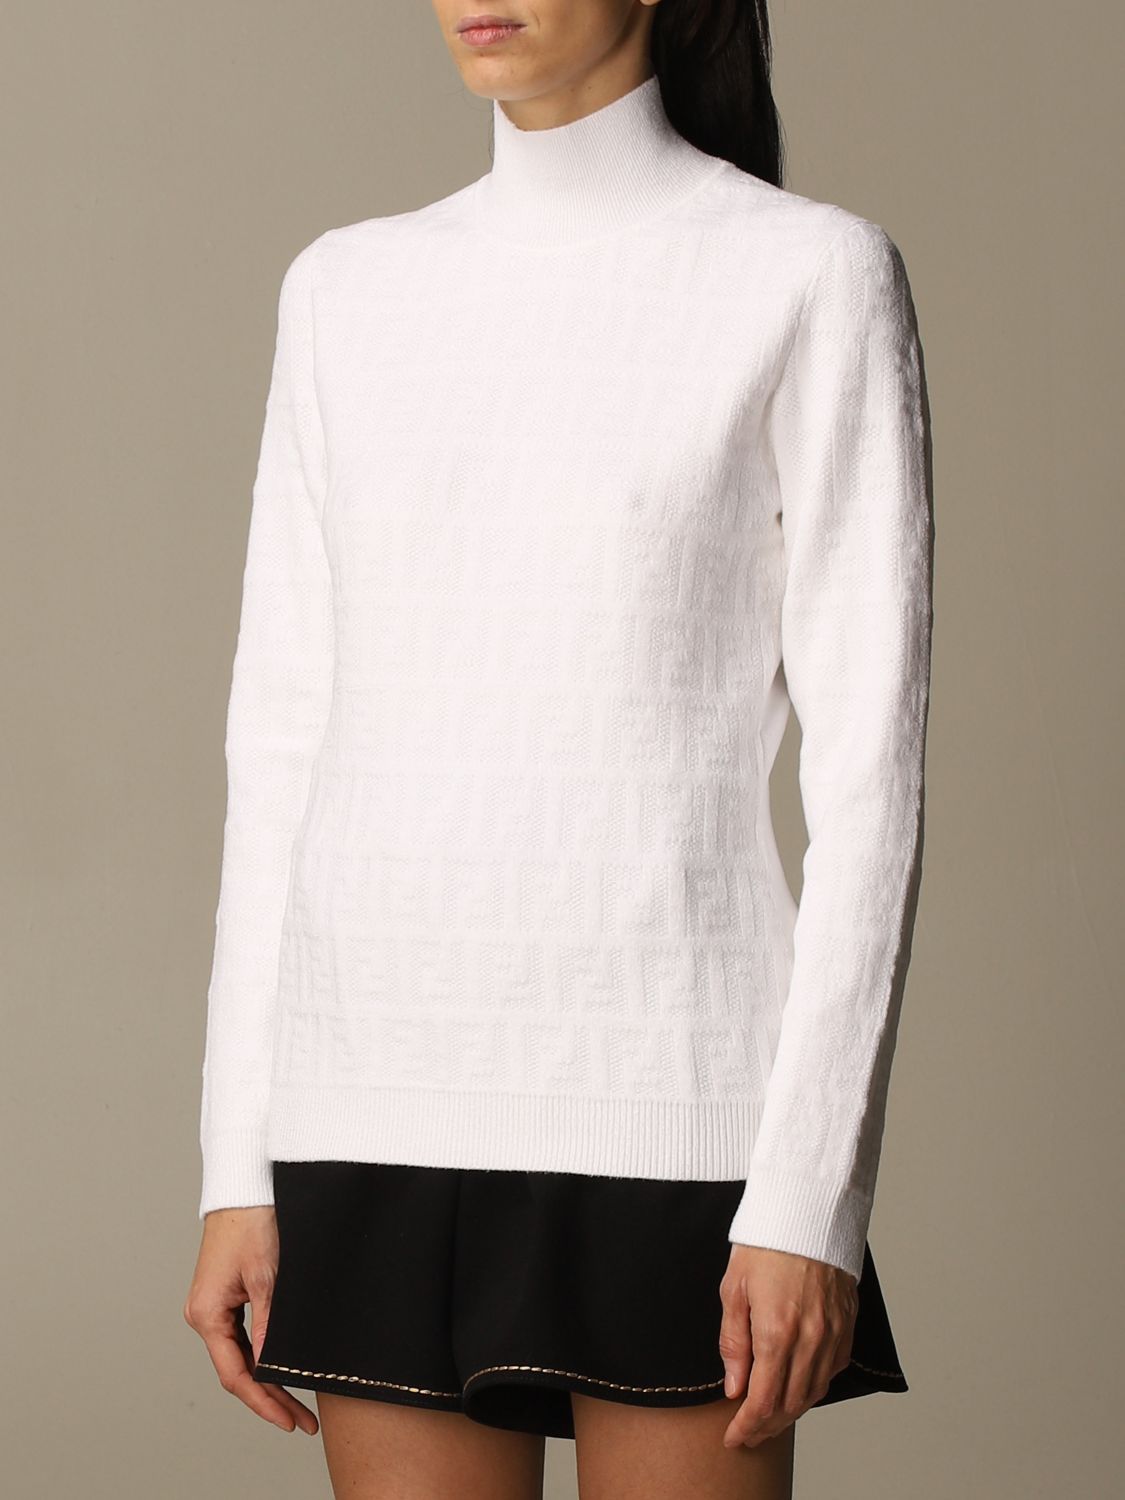 FENDI: turtleneck with FF logo in all-over jacquard - White | Sweater ...